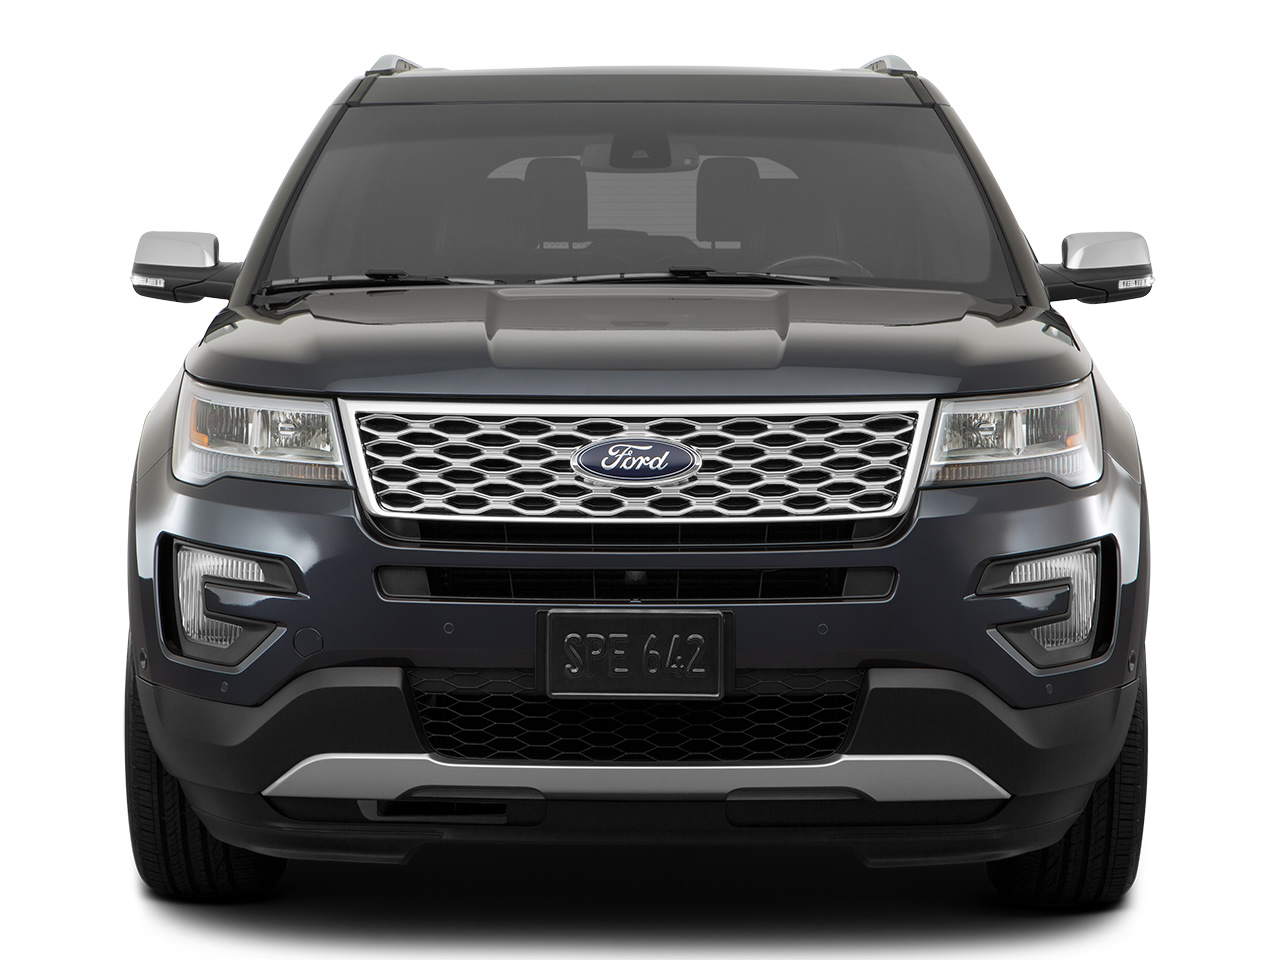 Ford Explorer - Best Canada SUV